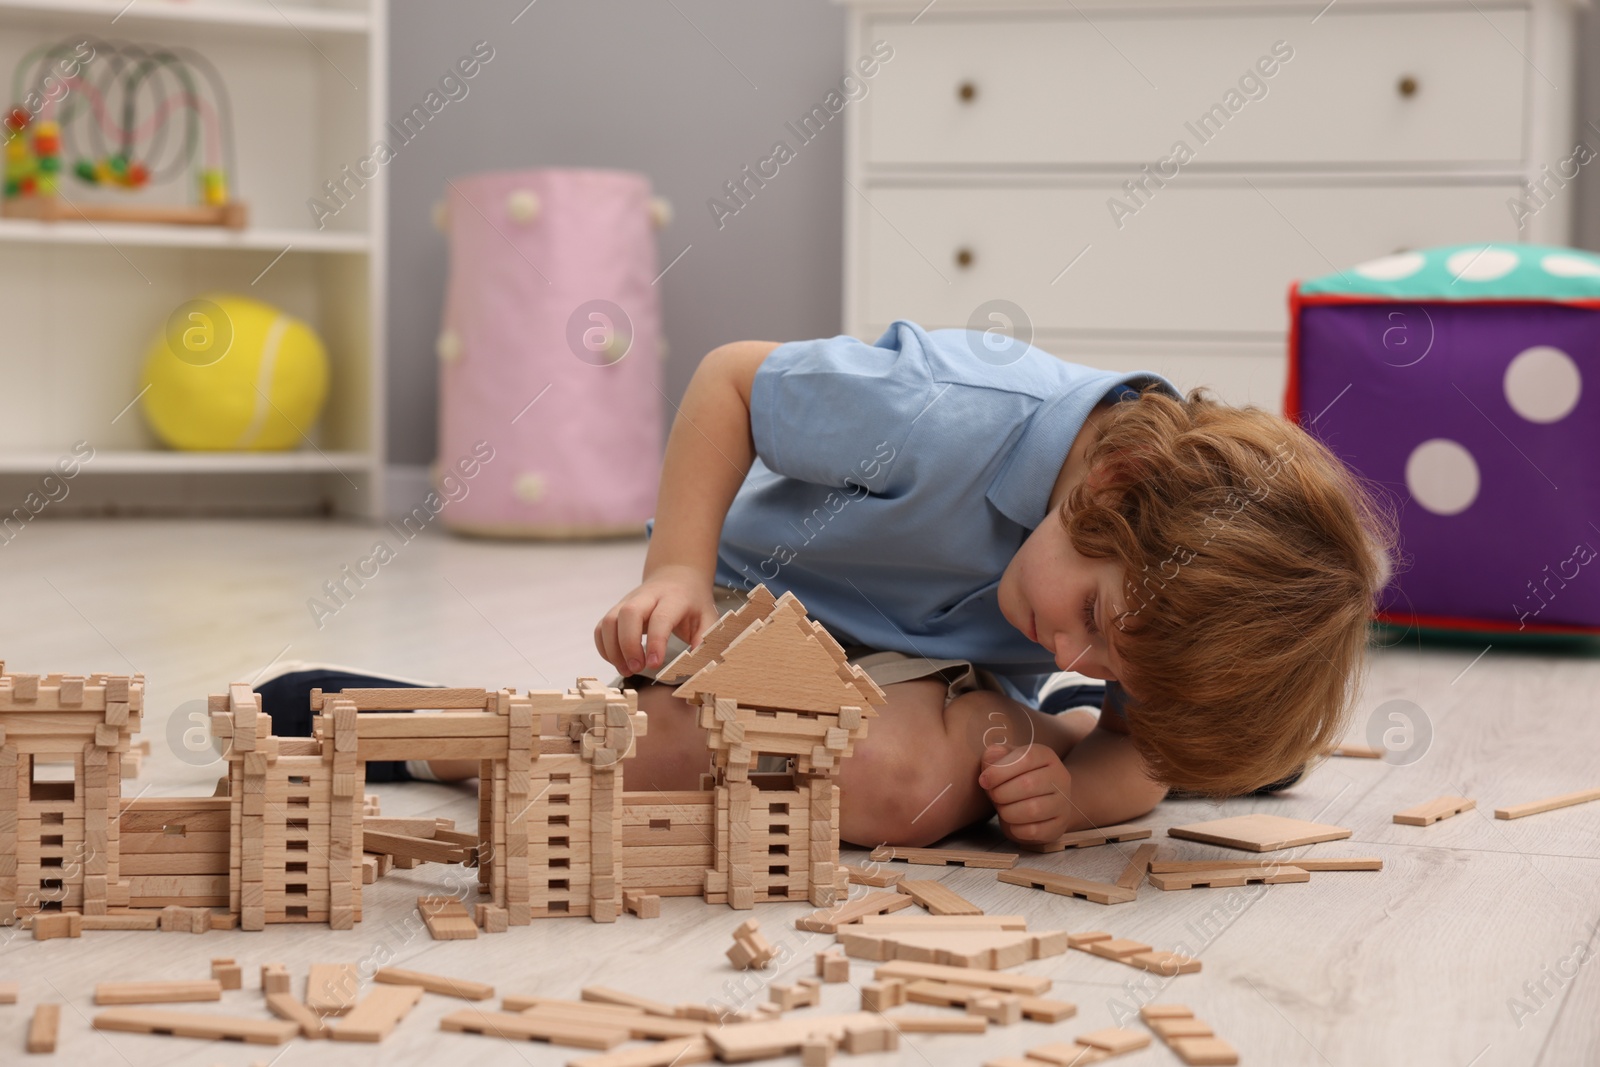 Photo of Little boy playing with wooden construction set on floor in room. Child's toy